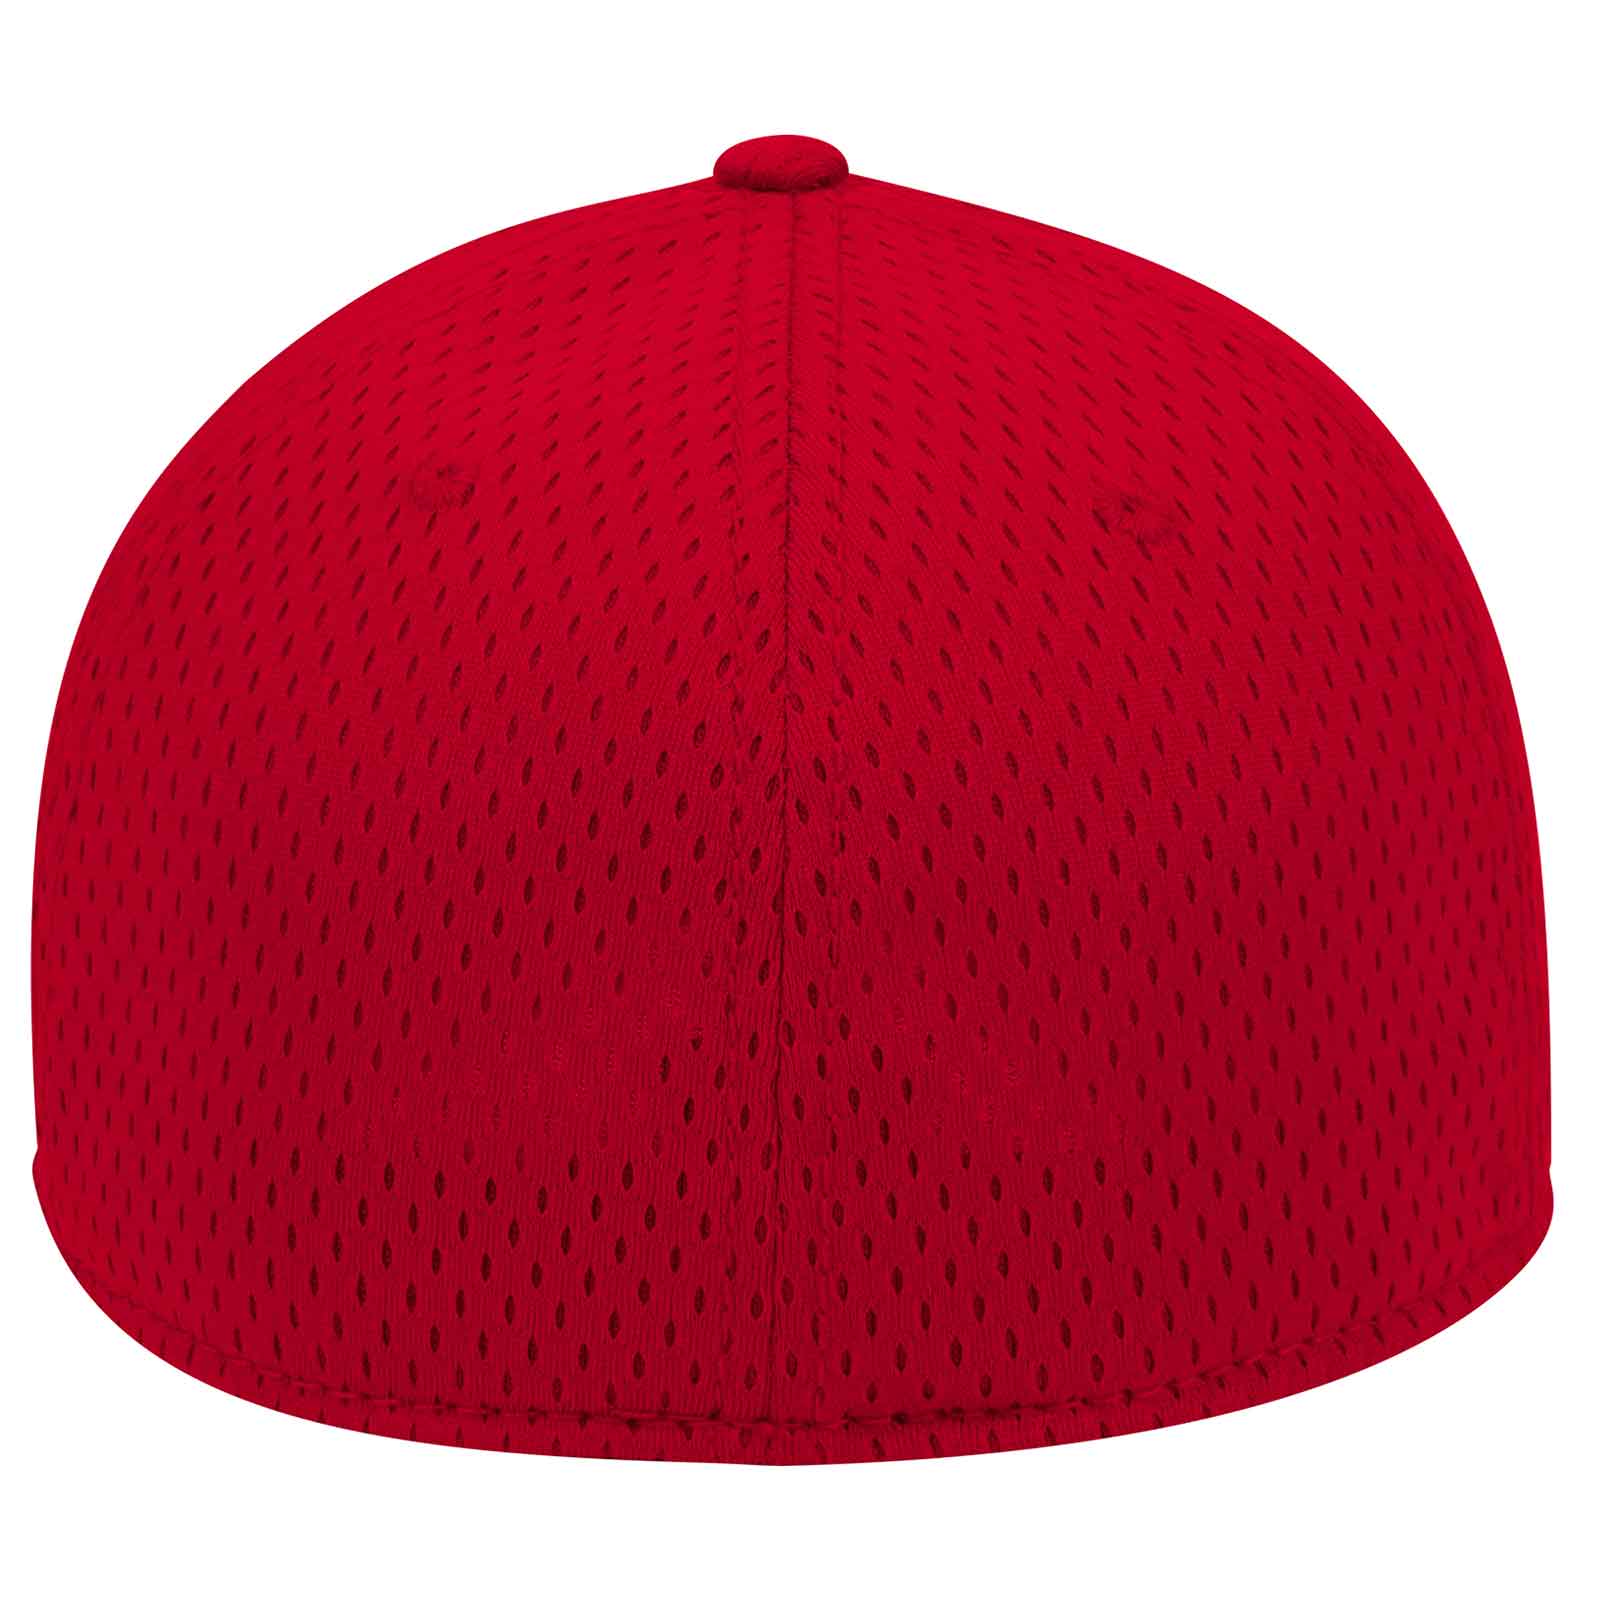 OTTO 11-1168 Stretchable Polyester Pro Mesh Flex 6 Panel Low Profile Baseball Cap - Red - HIT a Double - 1